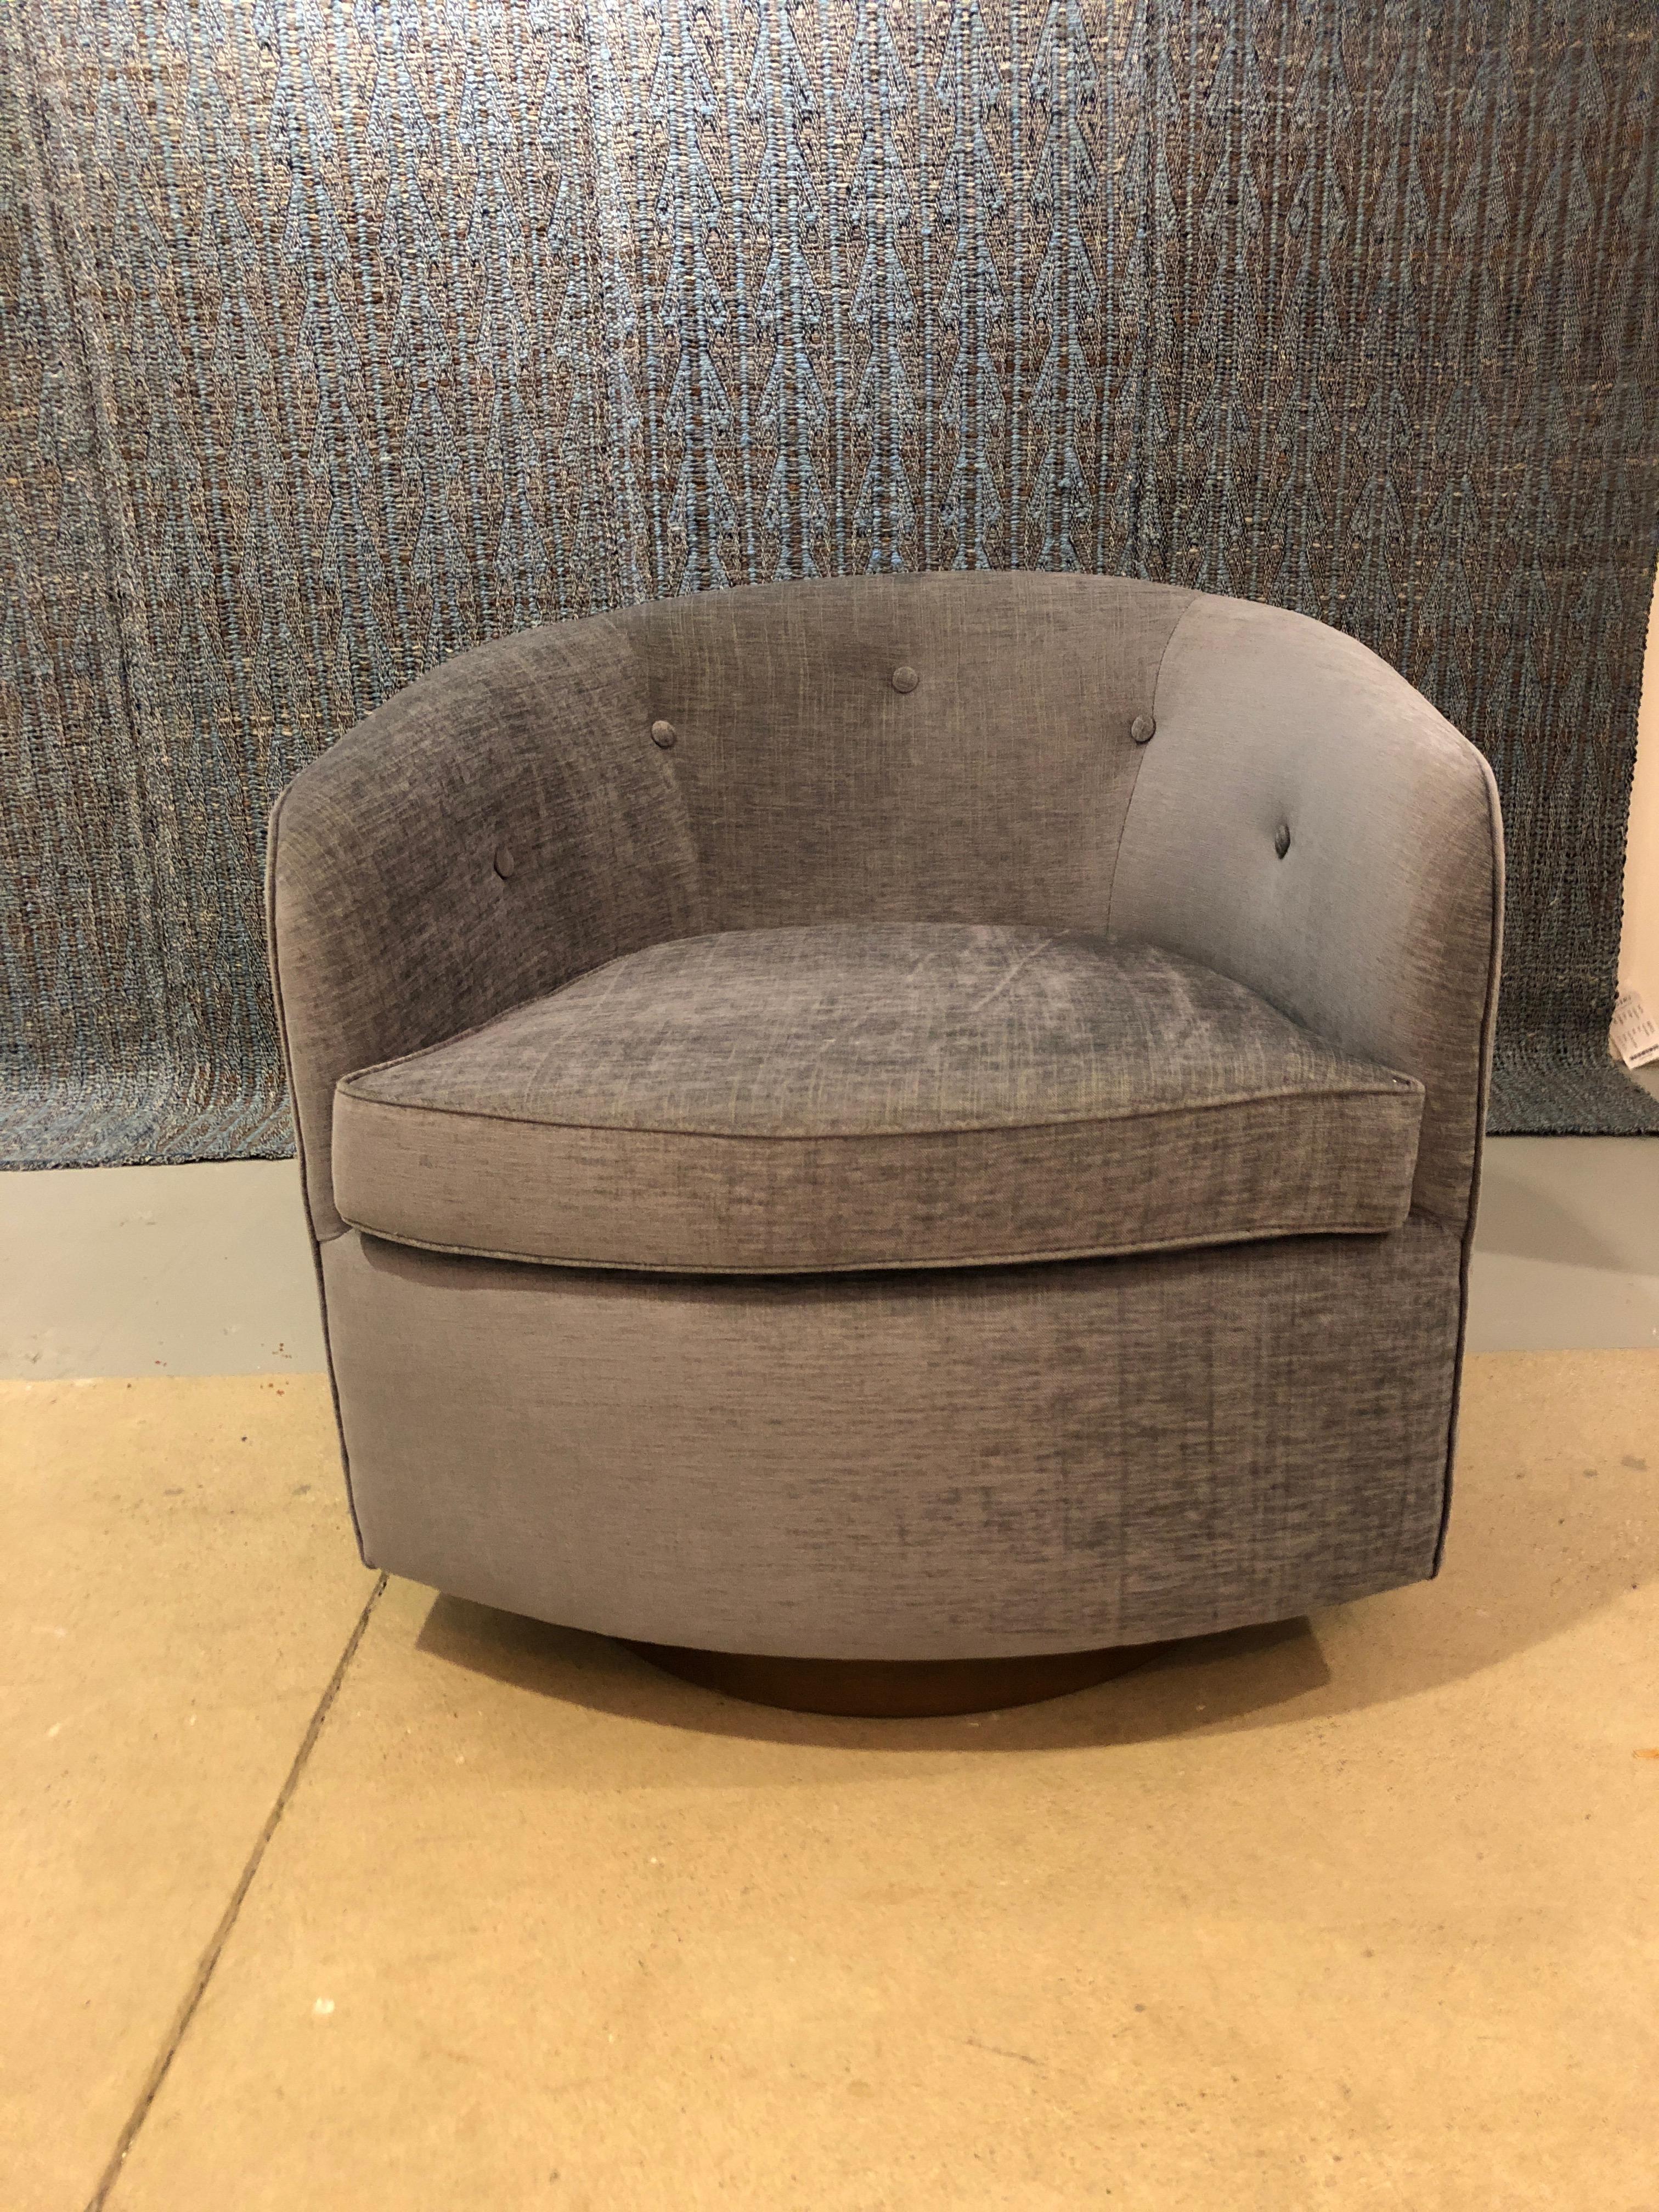 Pair of button backed lounge chairs shown in Saroma Plains chenille fabric (bluebell) on walnut swivel base. Available as shown (in stock) or available COM. Each chair requires 6 yards of fabric.